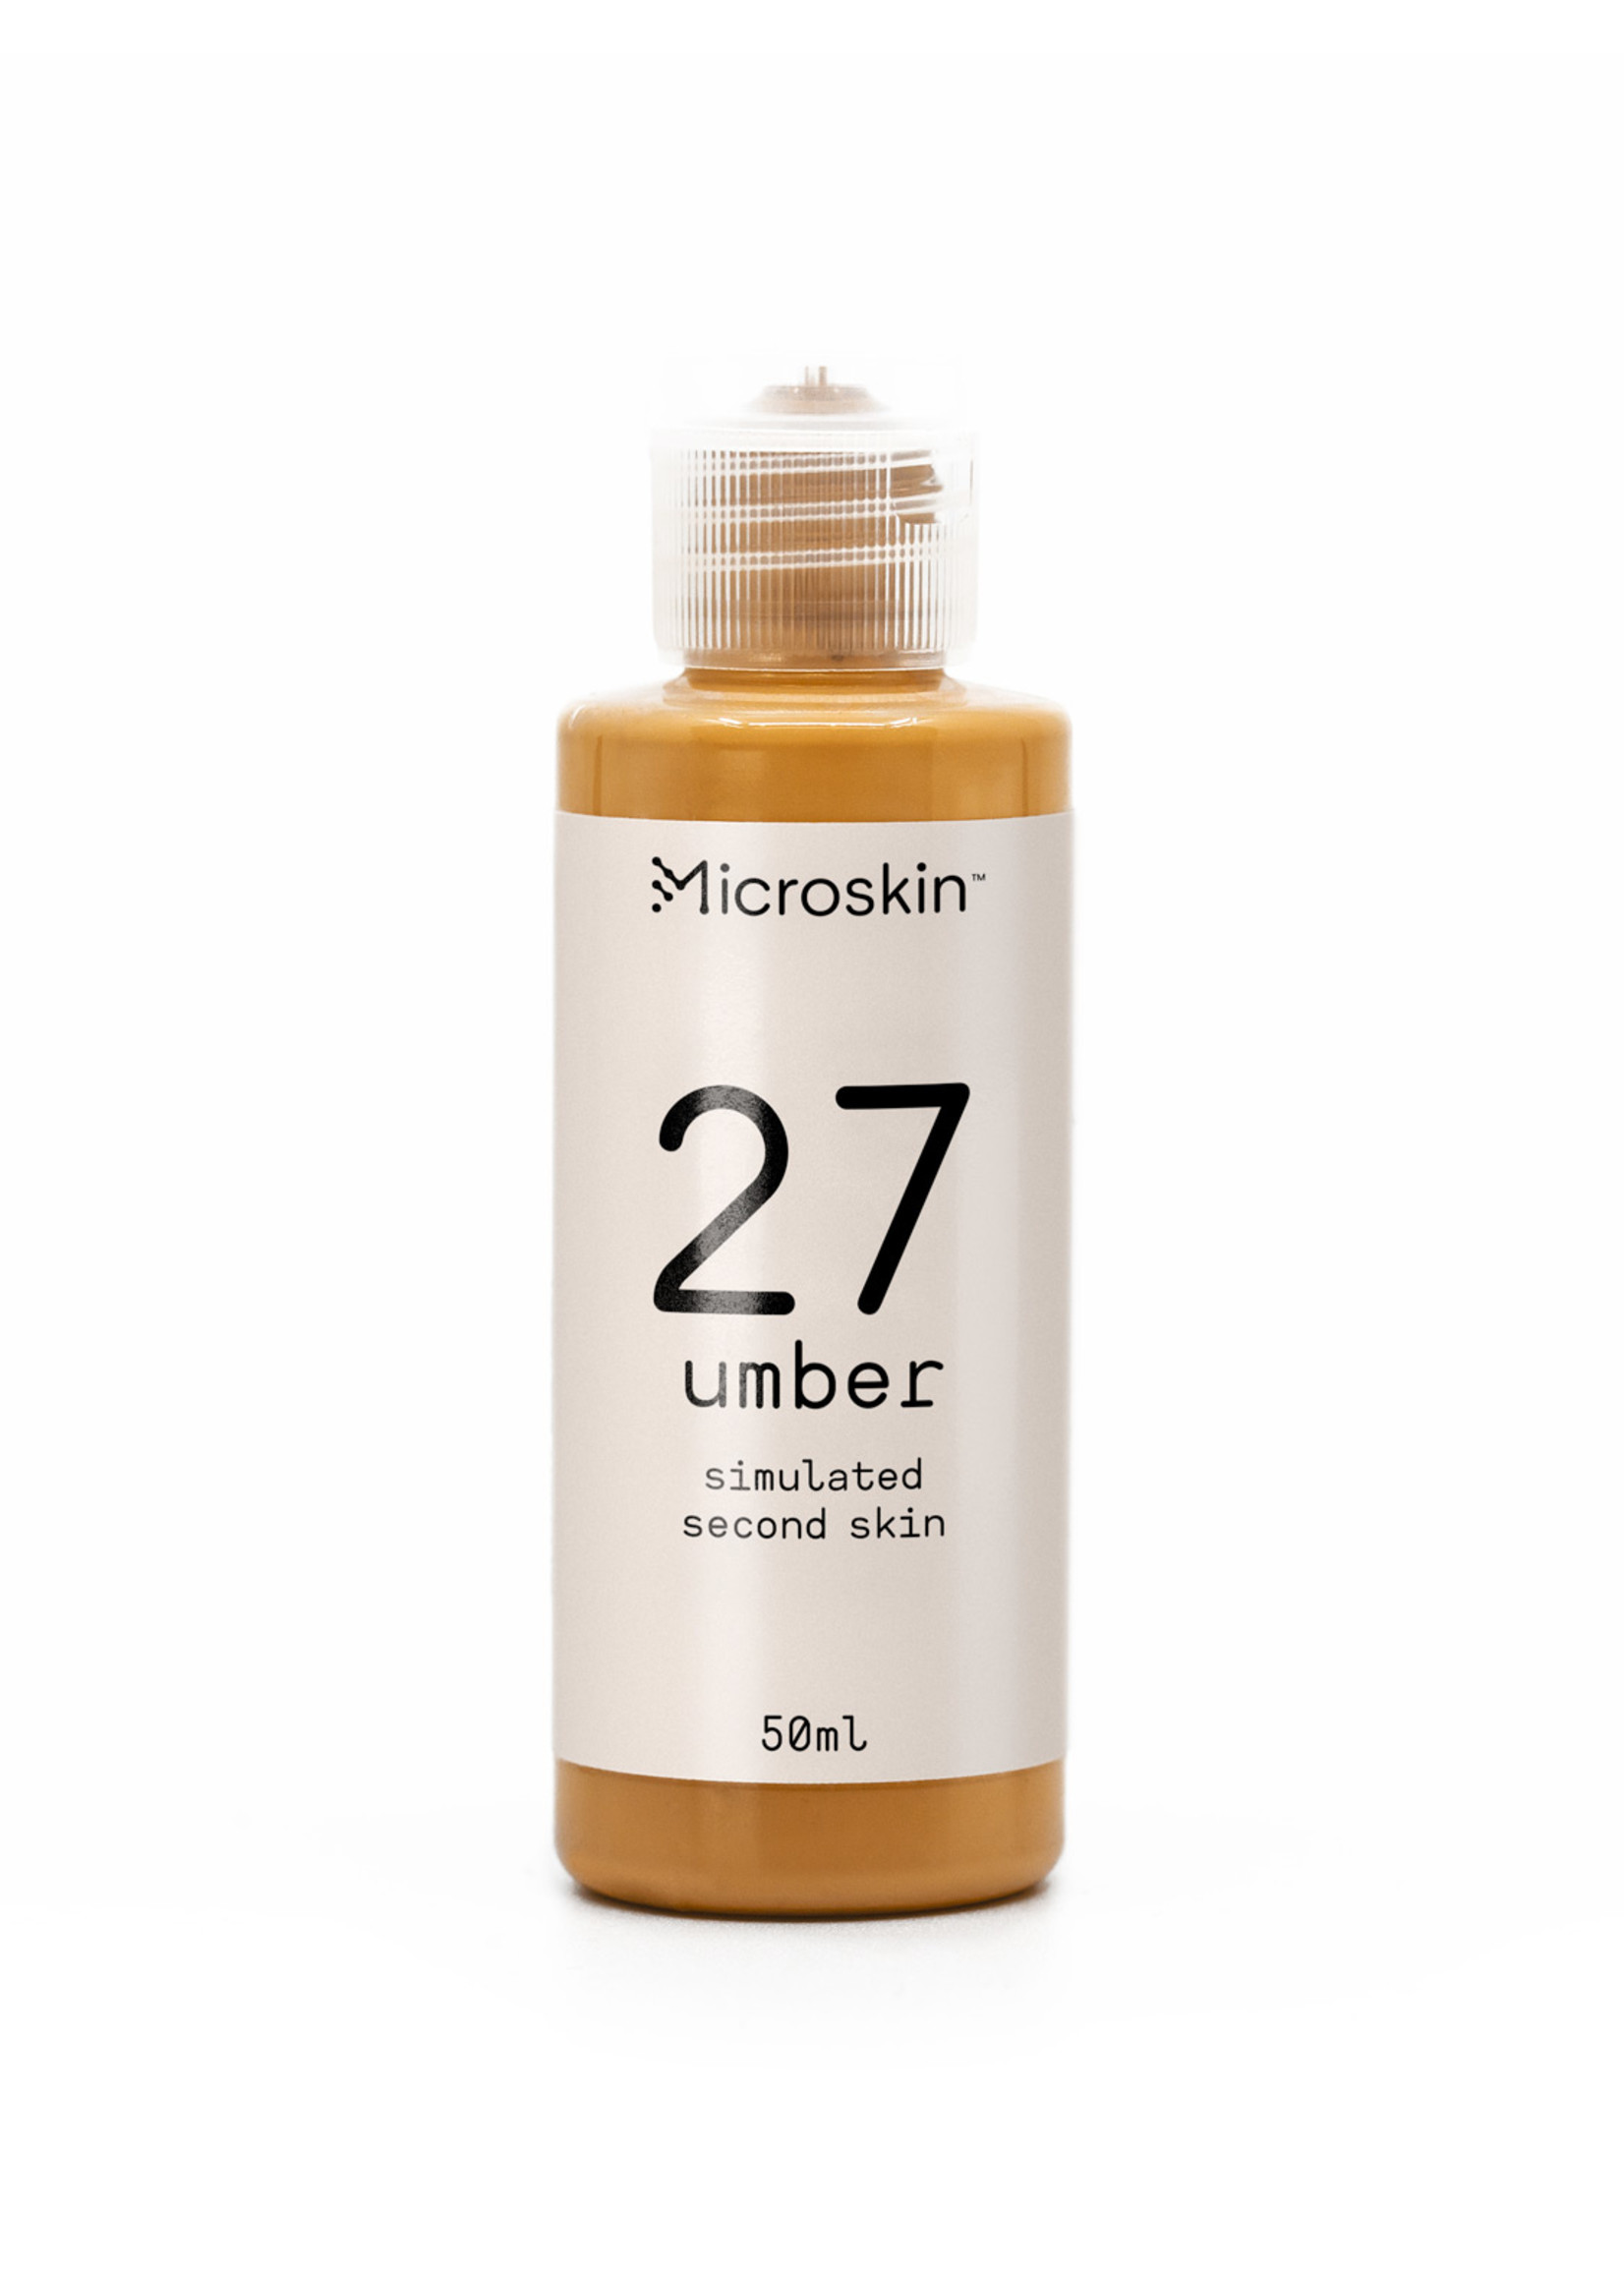 Microskin Camouflage Therapy Microskin 50 ml Umber 27